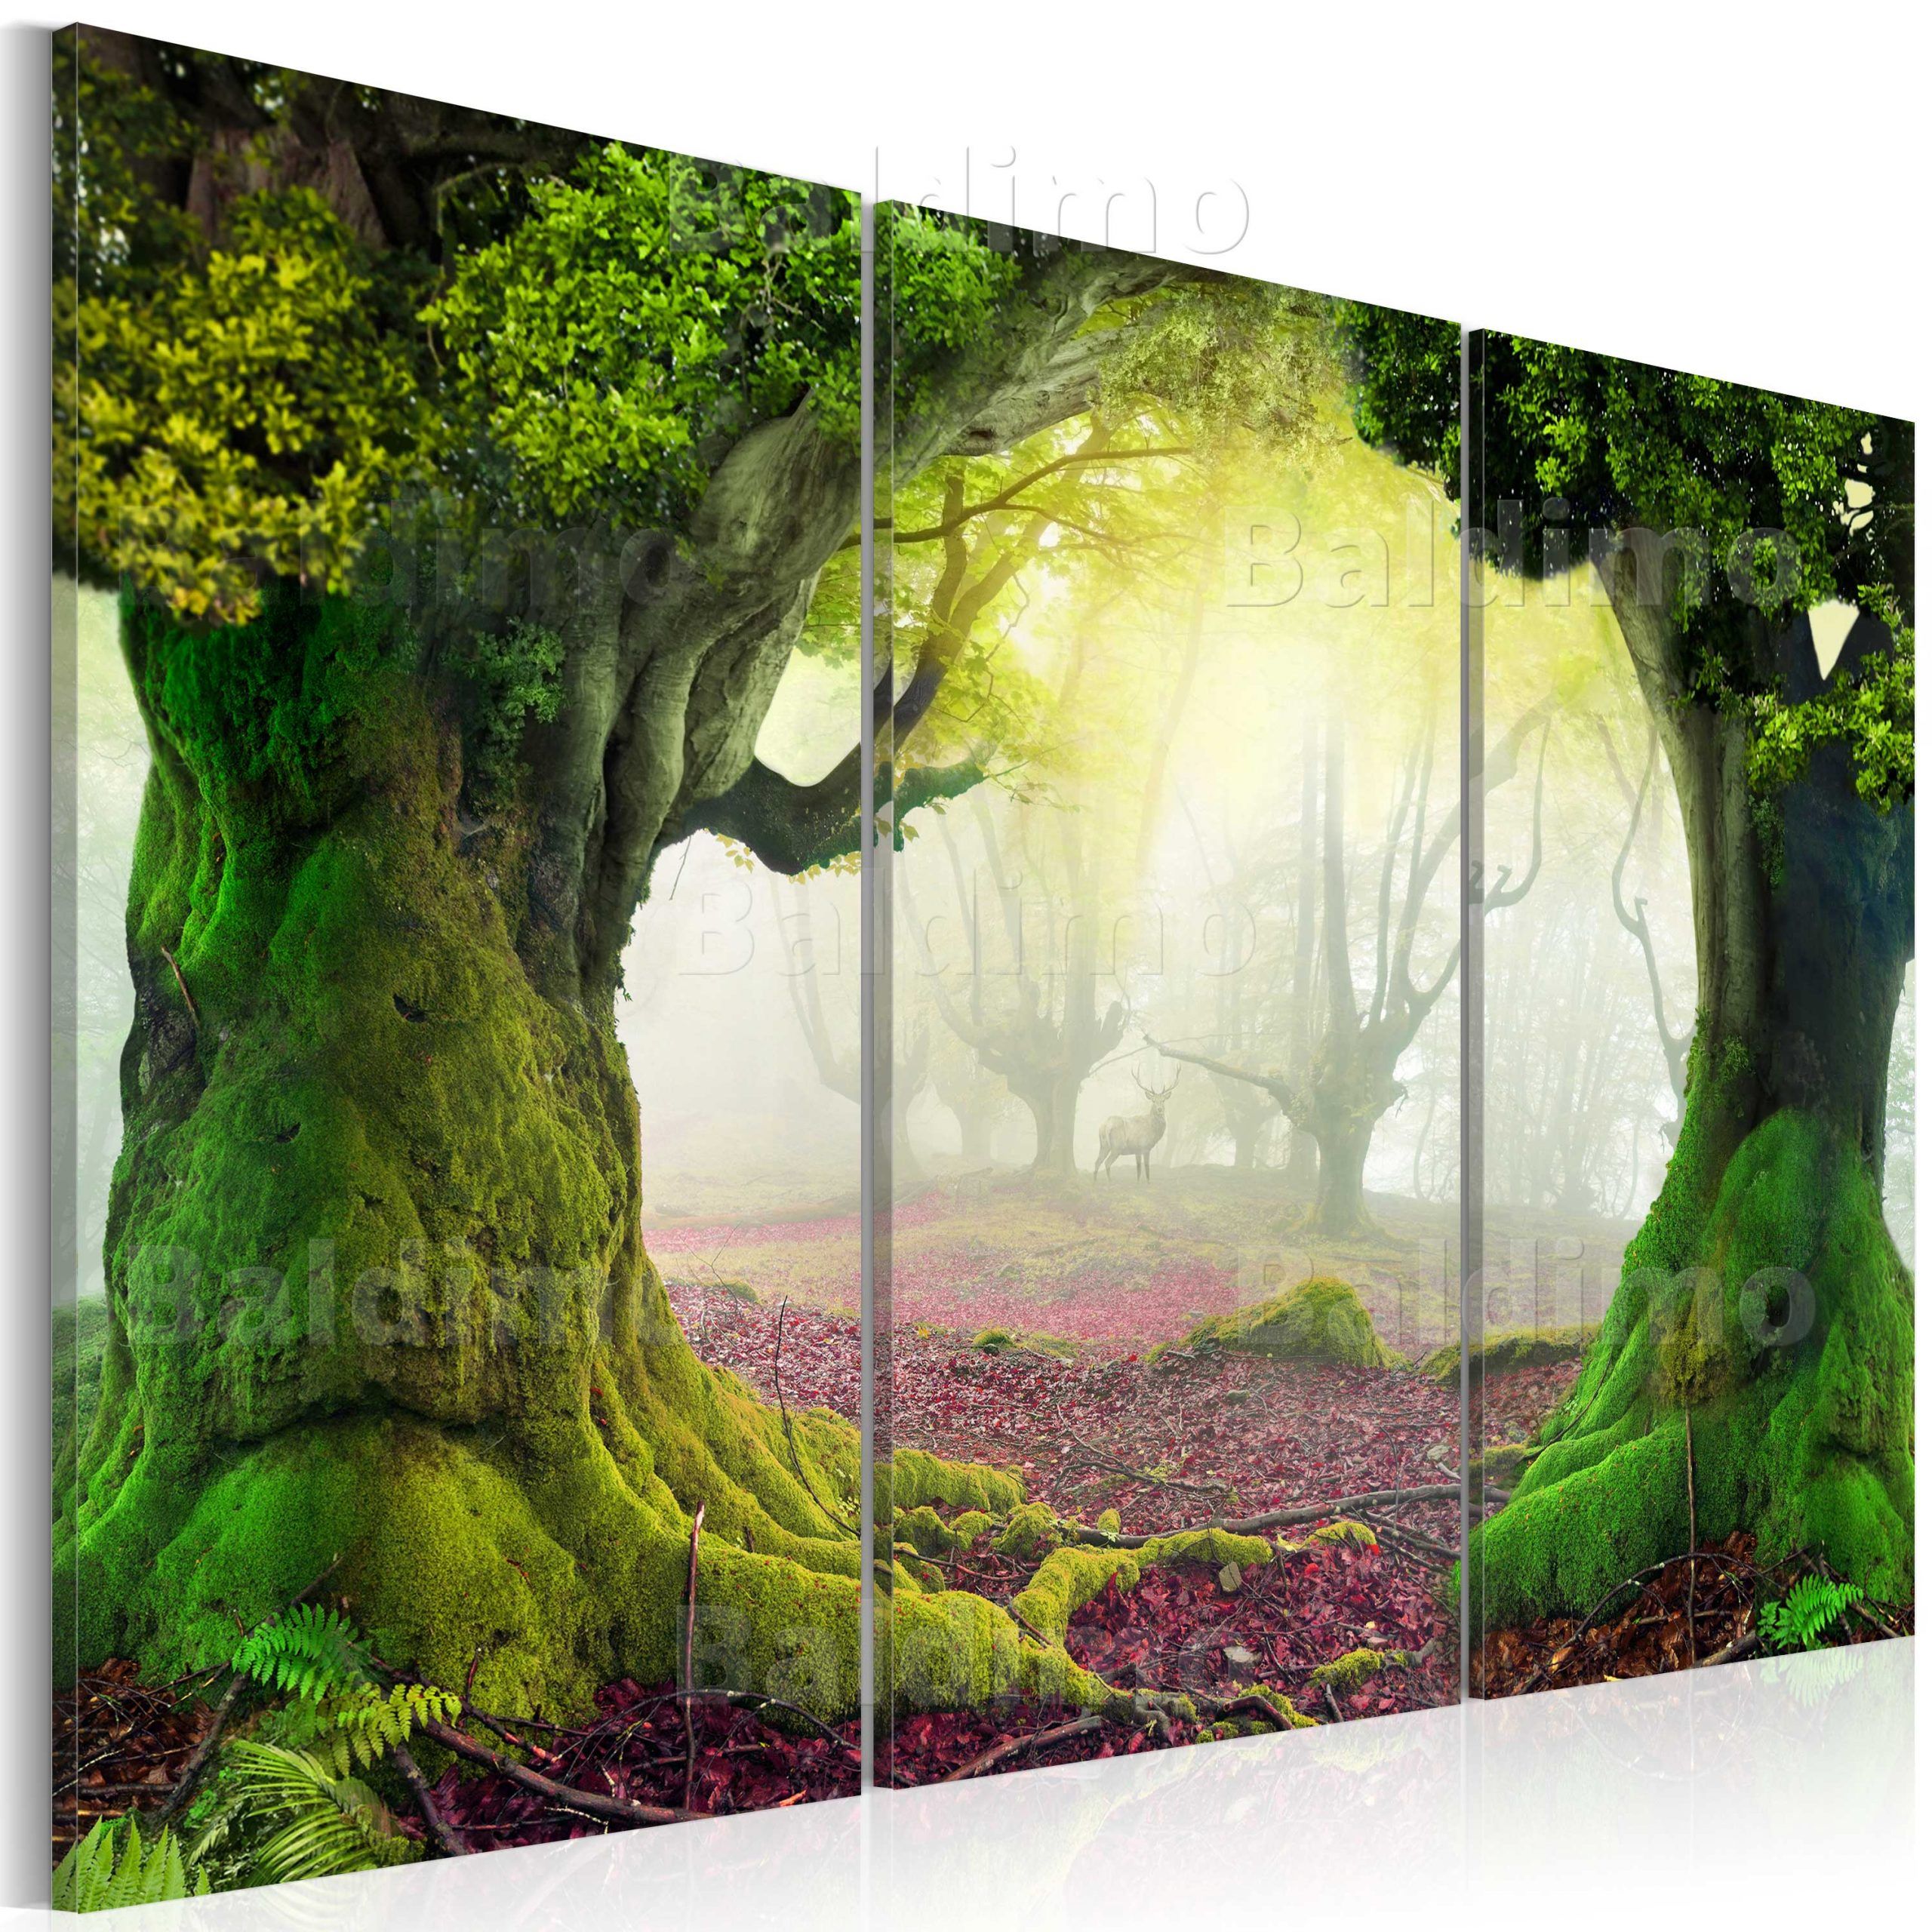 Large Canvas Wall Art Print + Image + Picture + Photo Nature 030112 70 Within Most Up To Date Natural Wall Art (View 8 of 20)